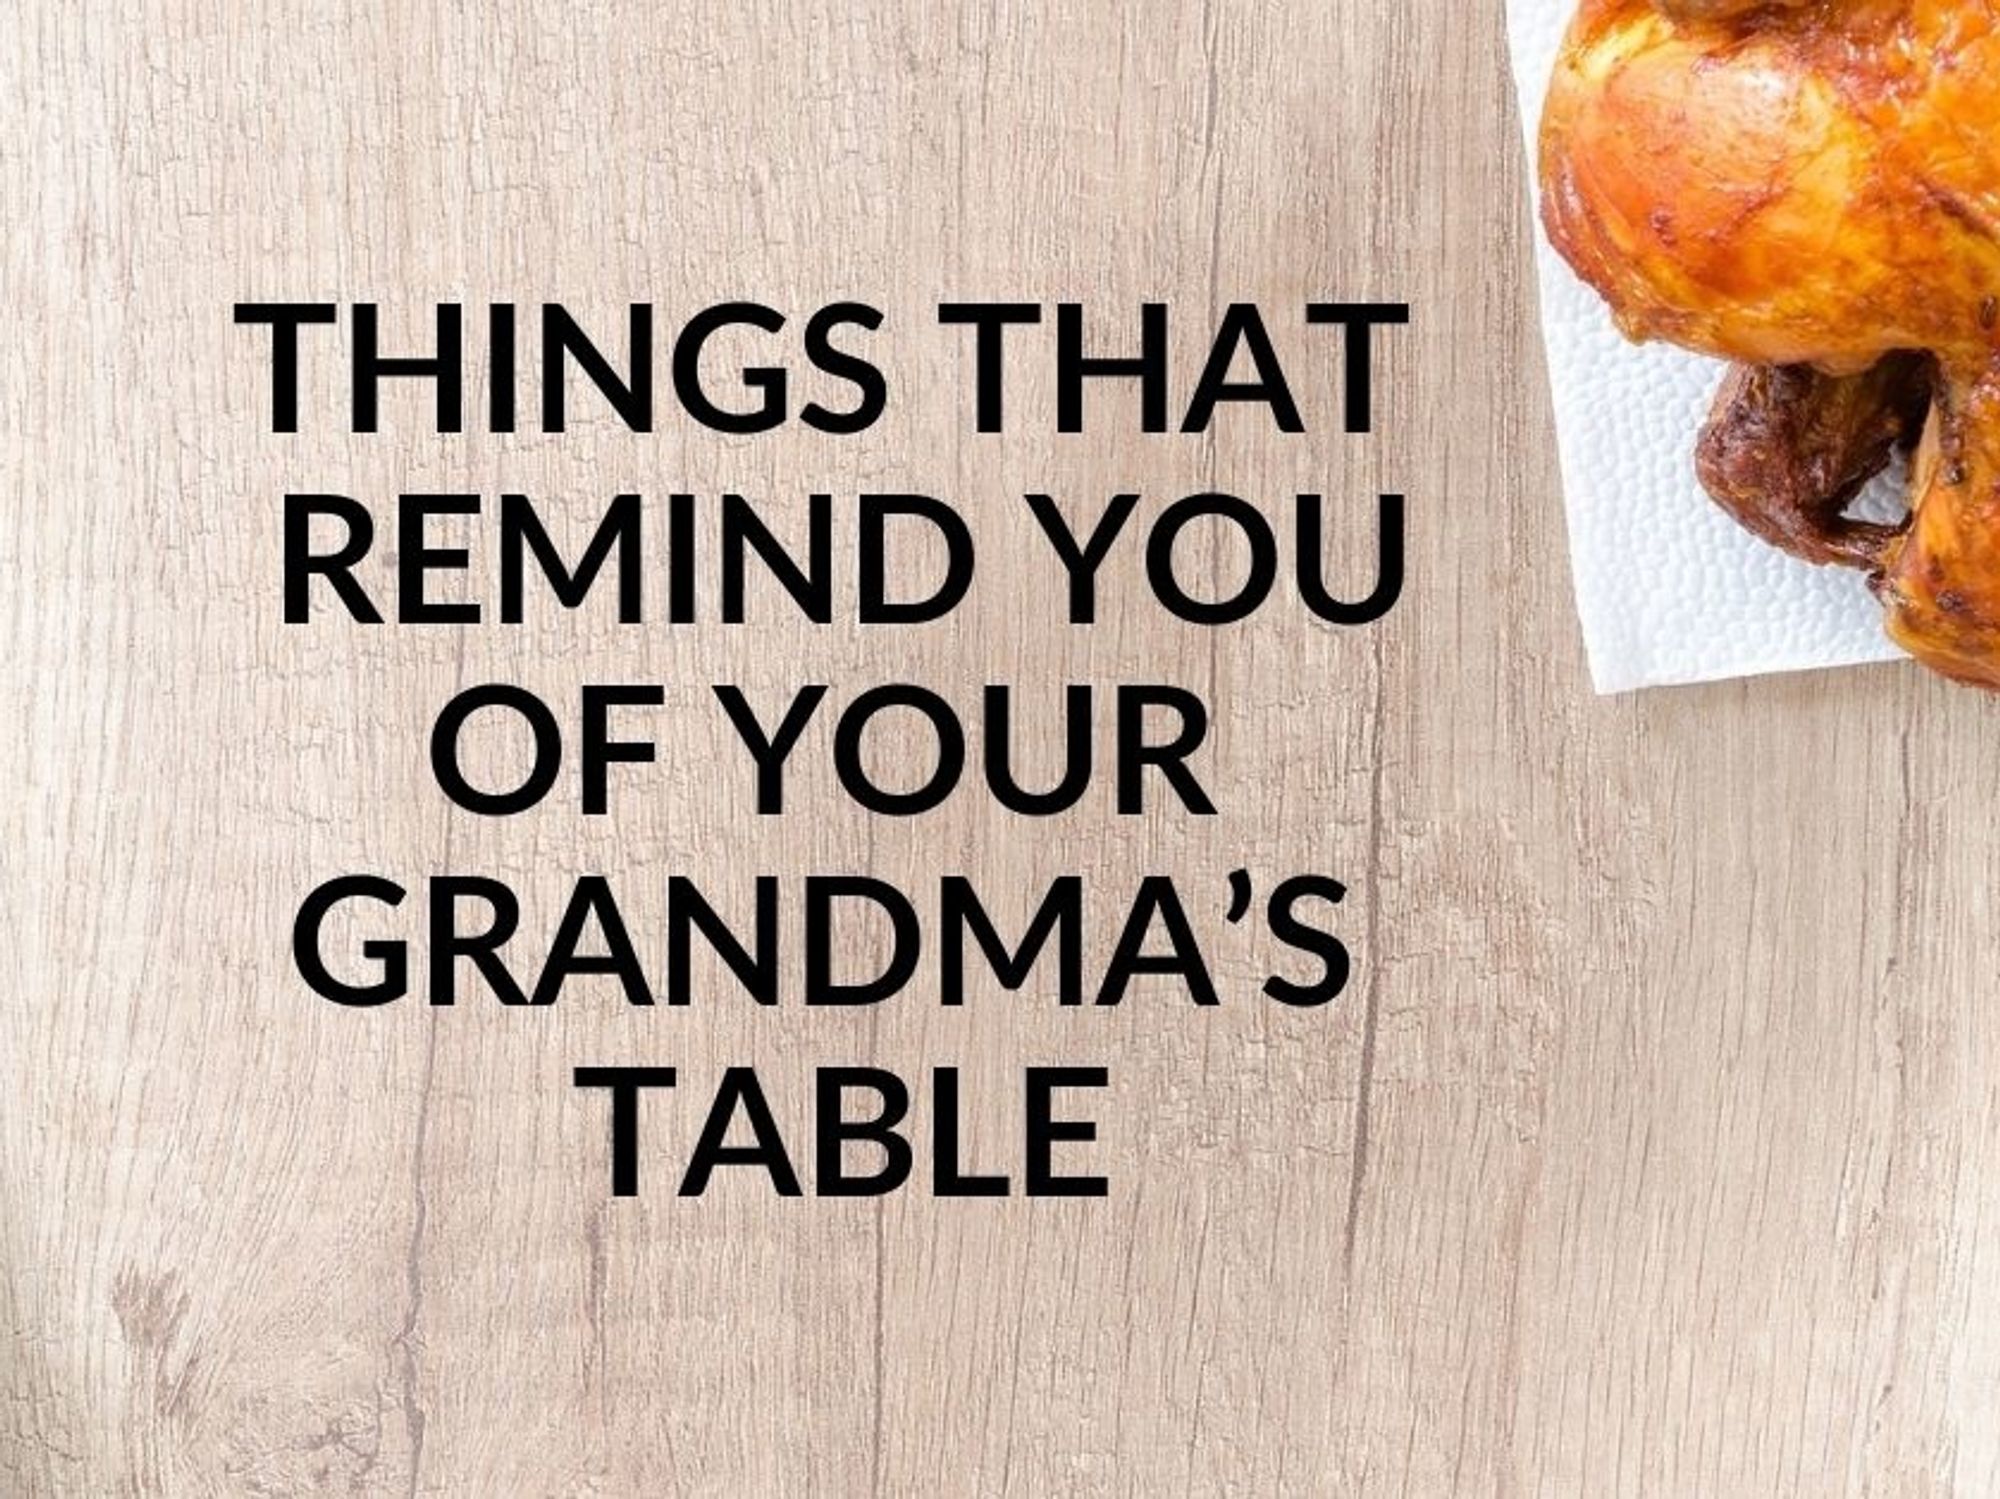 What's your grandma name? Take our quiz to find out - It's a Southern Thing